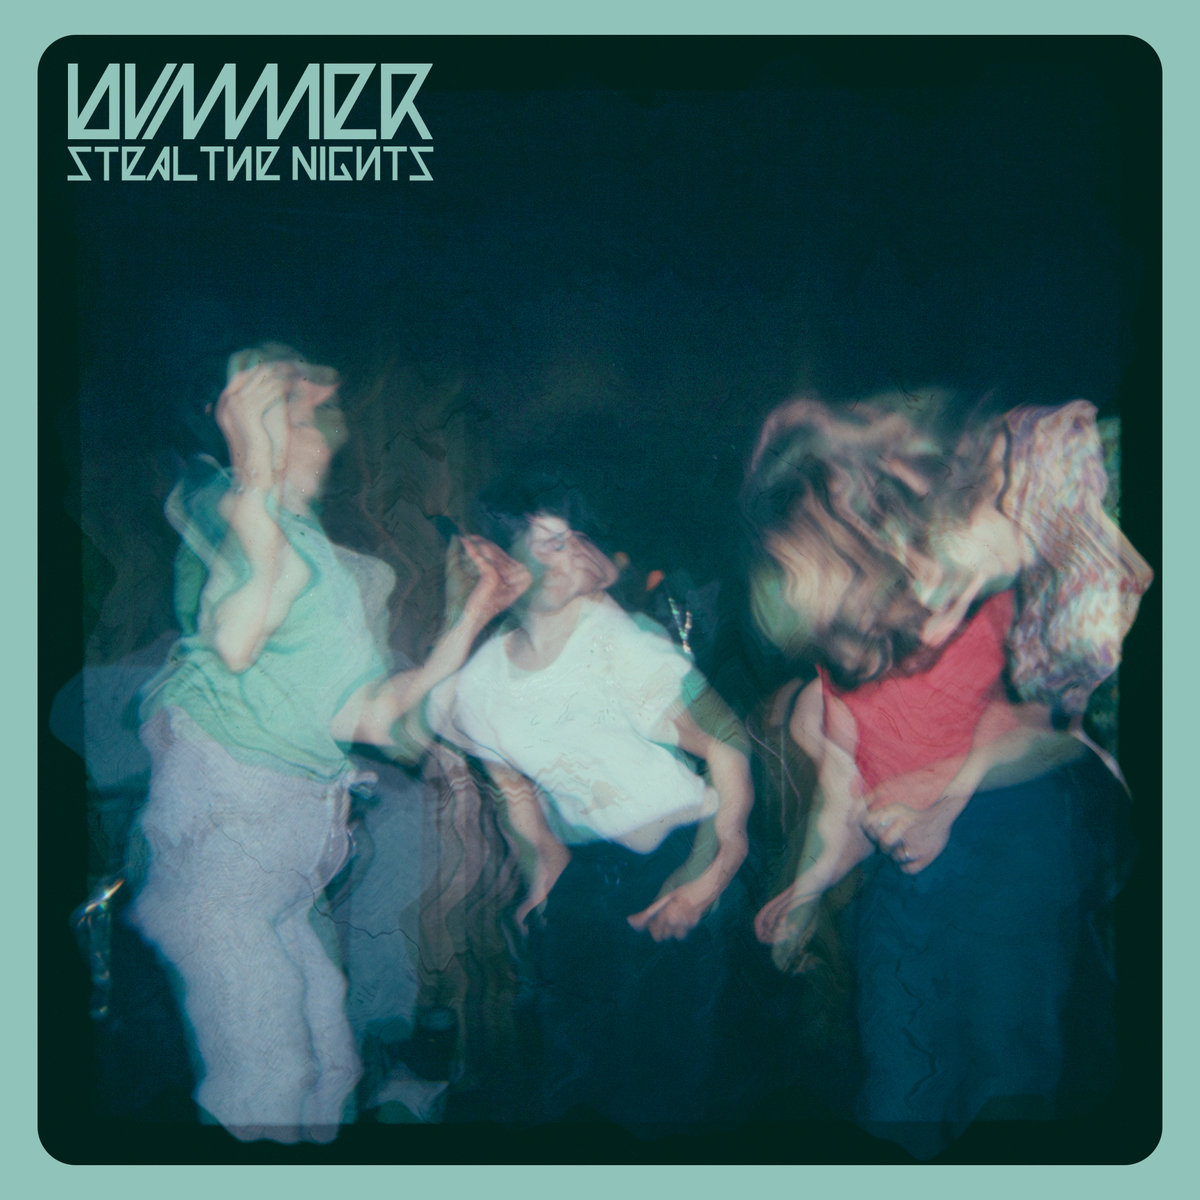 Bummer - Steal The Nights EP